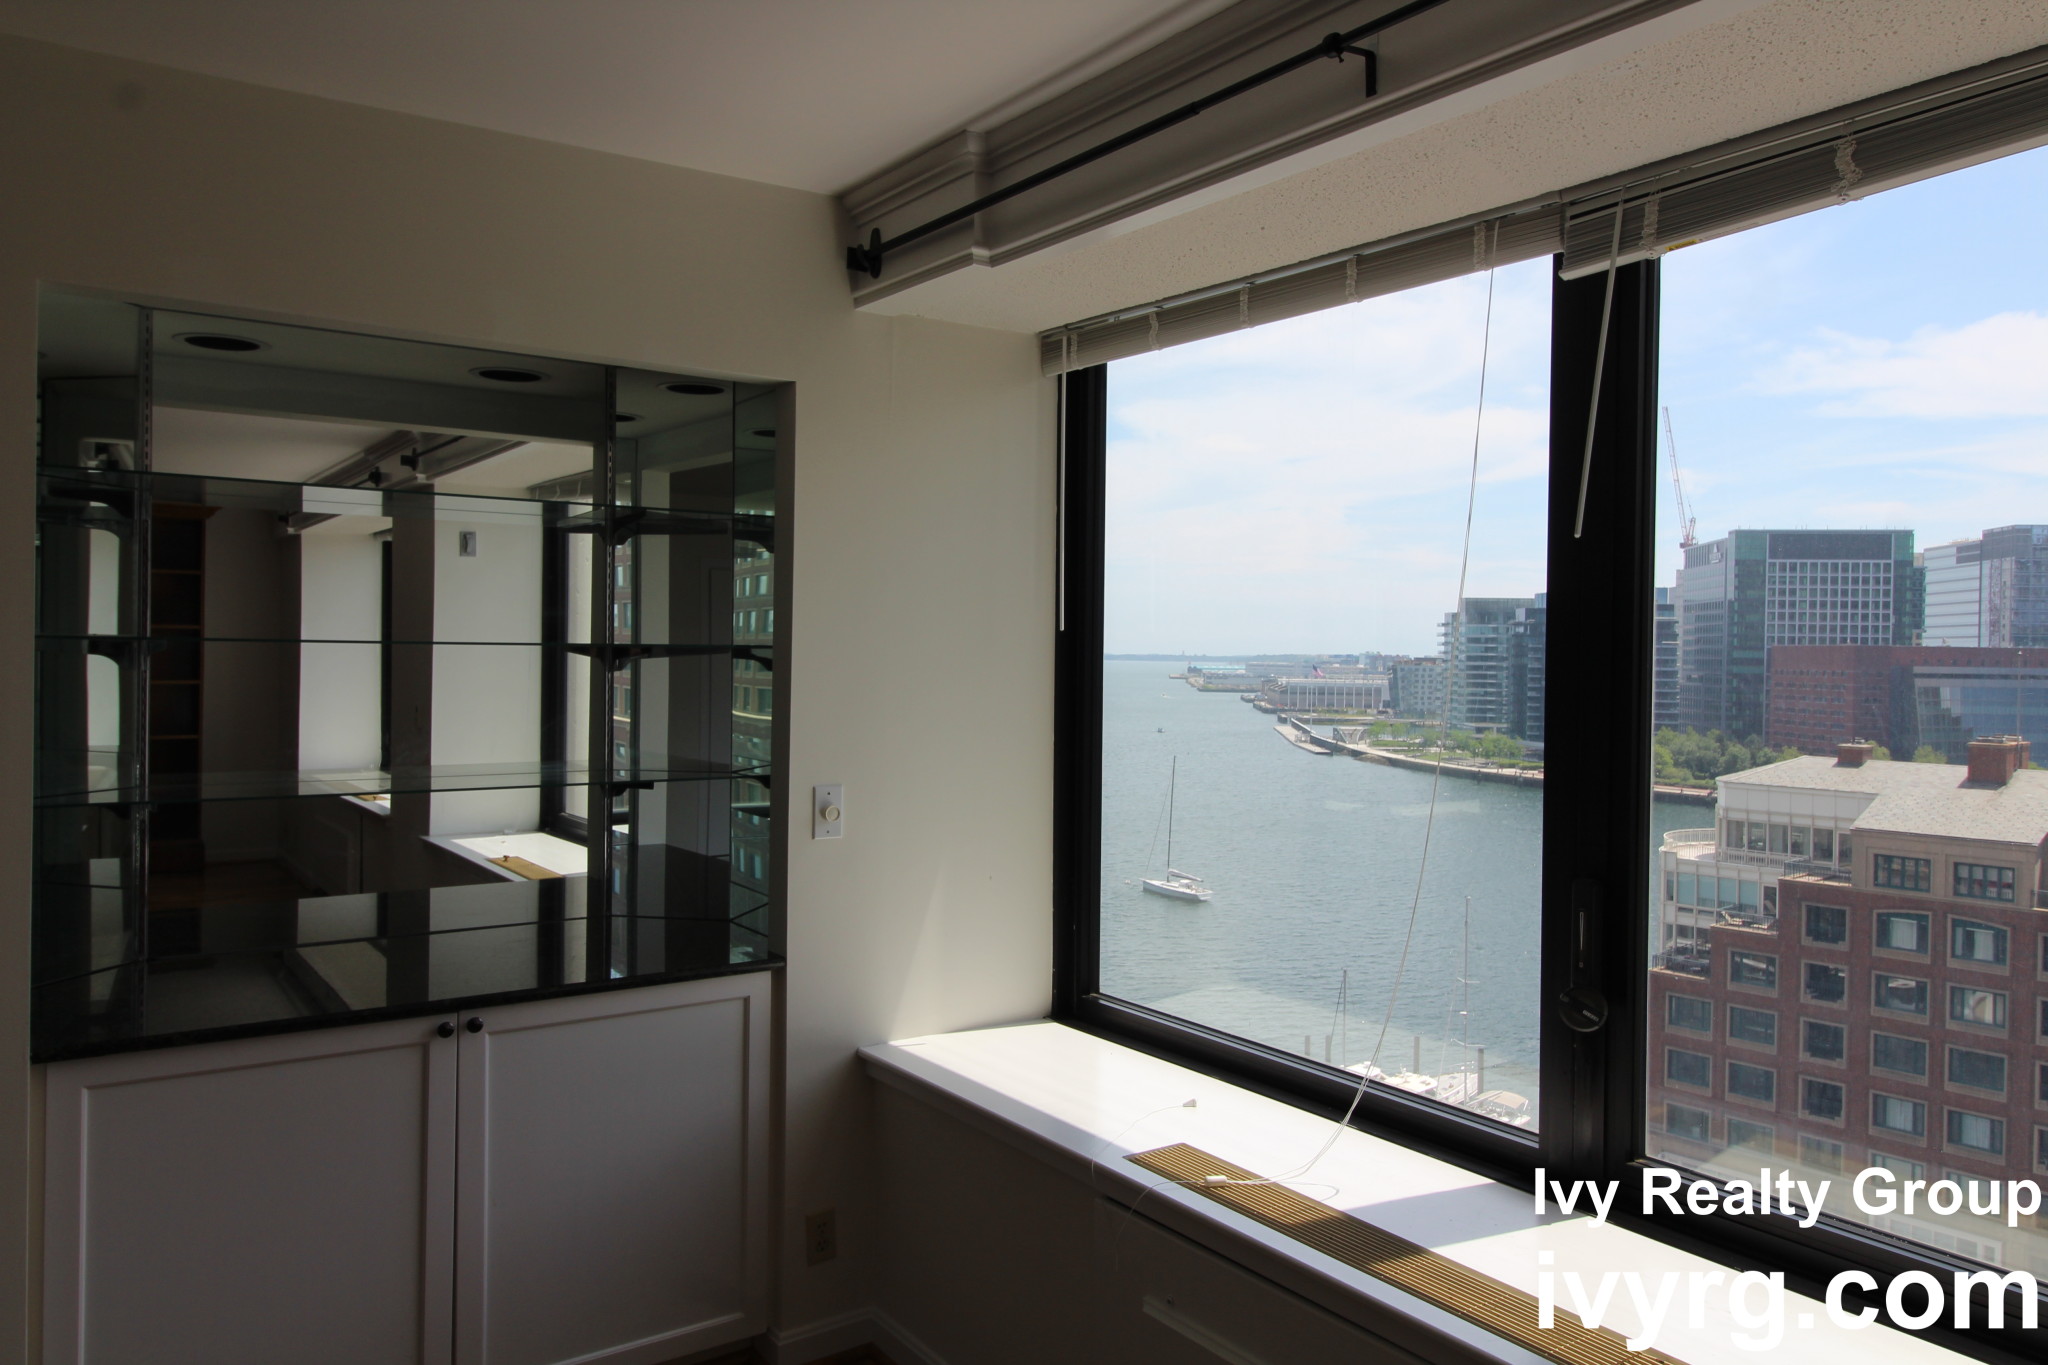 Photos of apartment on Commercial Wharf West,Boston MA 02110